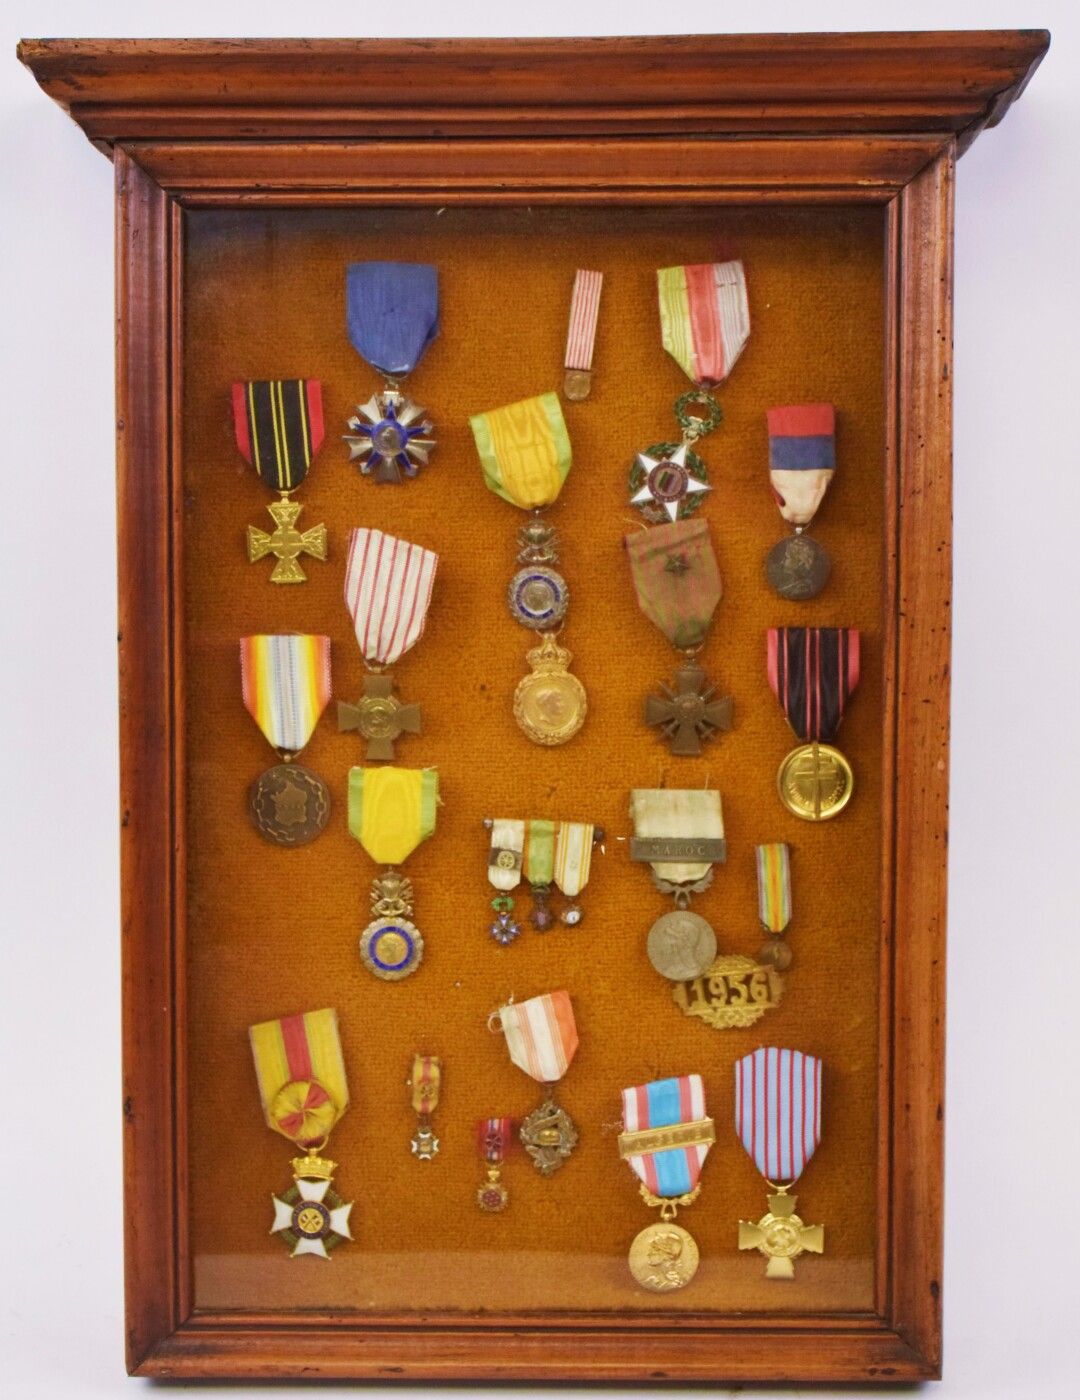 Null [MILITARIA]

Framed with 16 medals including: 

- Cross of the voluntary co&hellip;